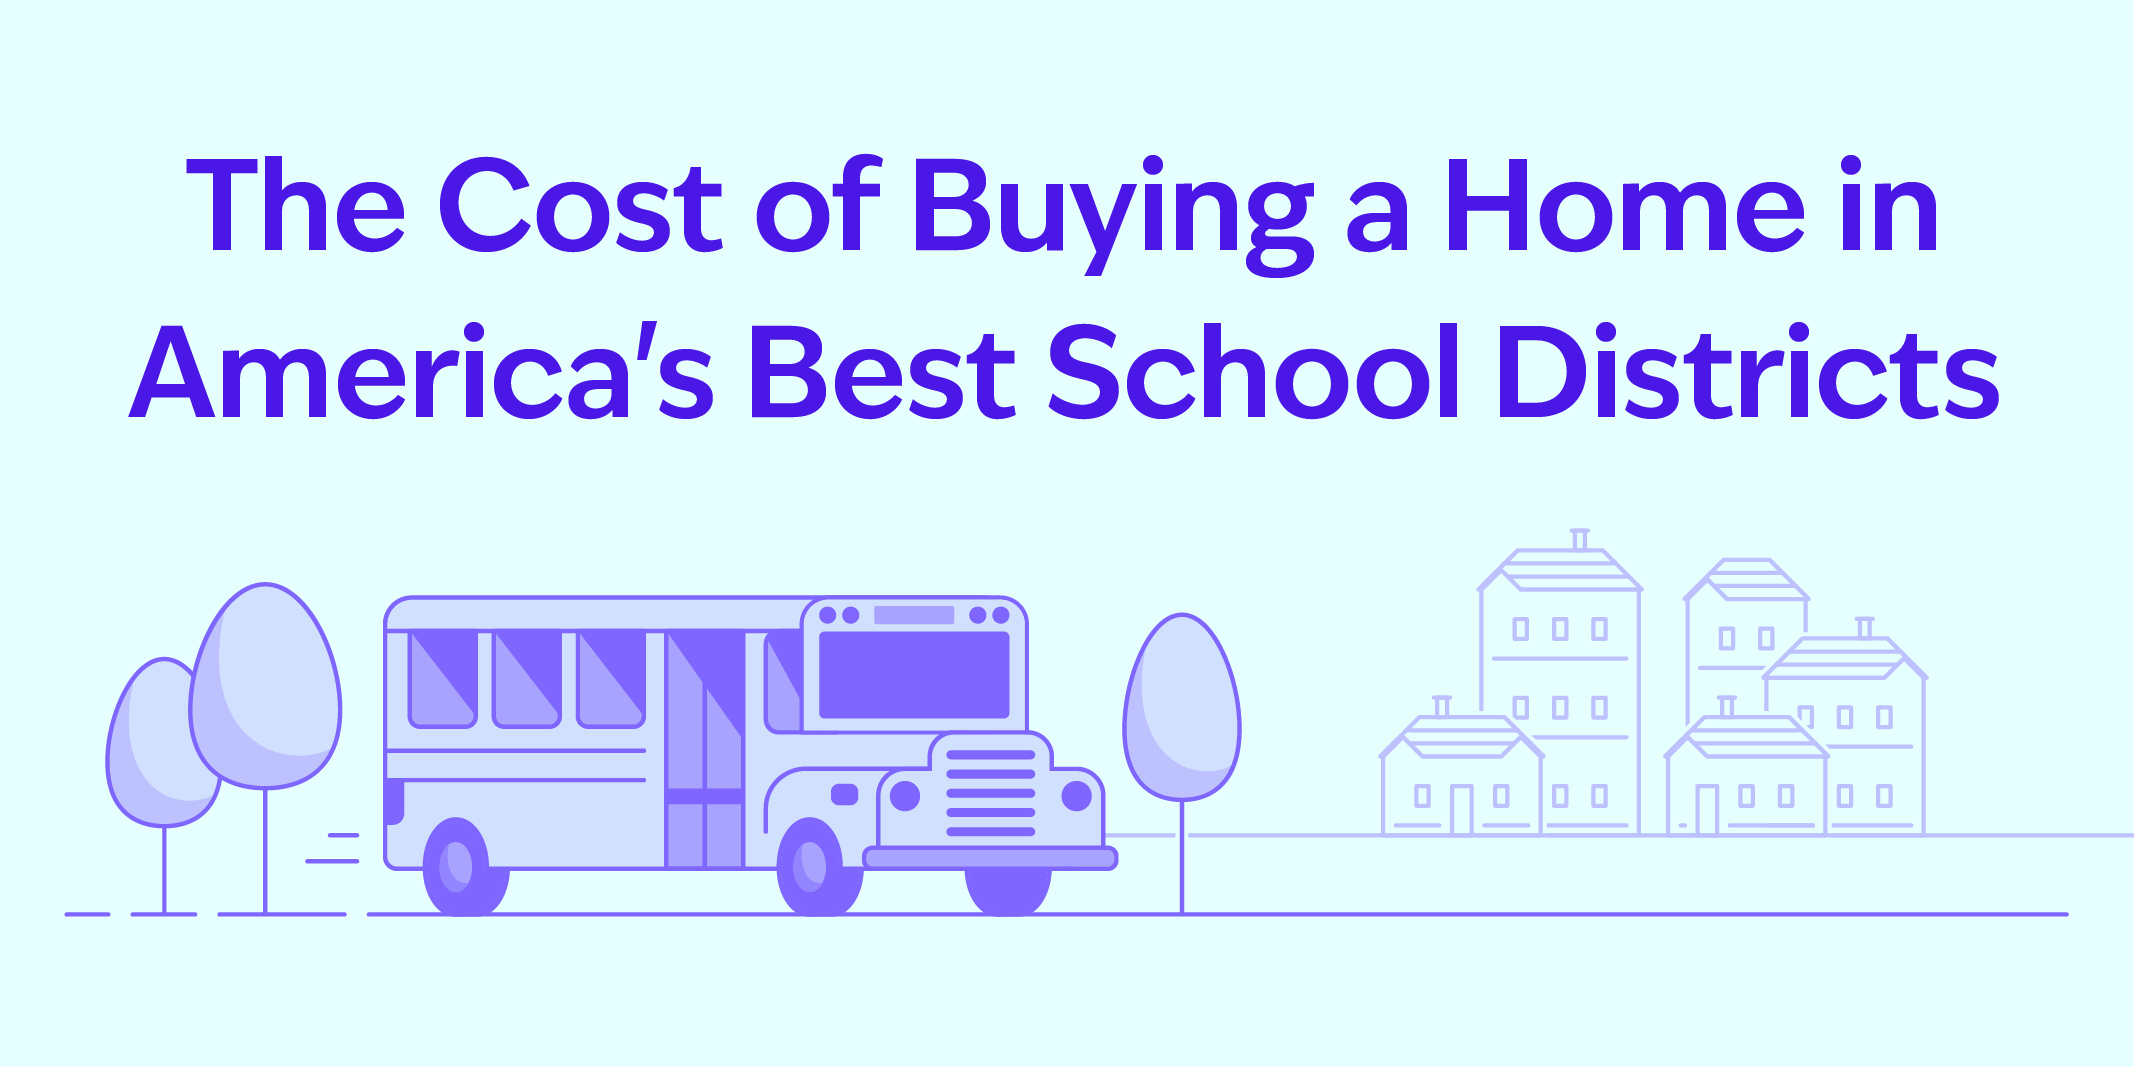 A header image for a blog about the cost of buying a home in America’s best school districts